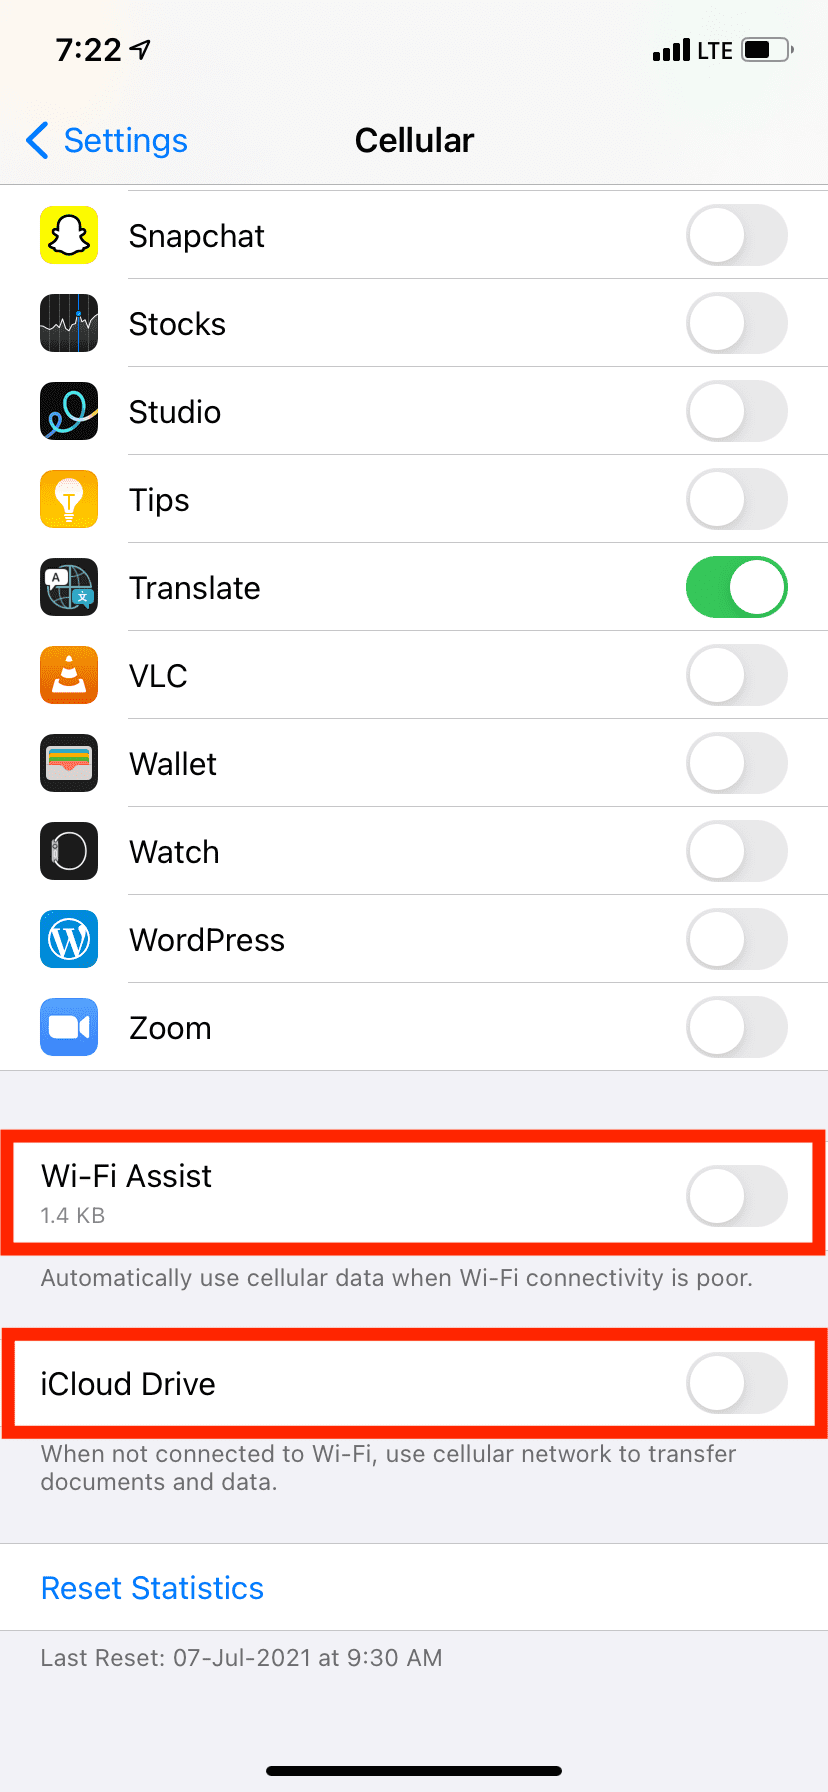 Turn off Wi-Fi Assist and iCloud Drive in iPhone Cellular Settings to save mobile data